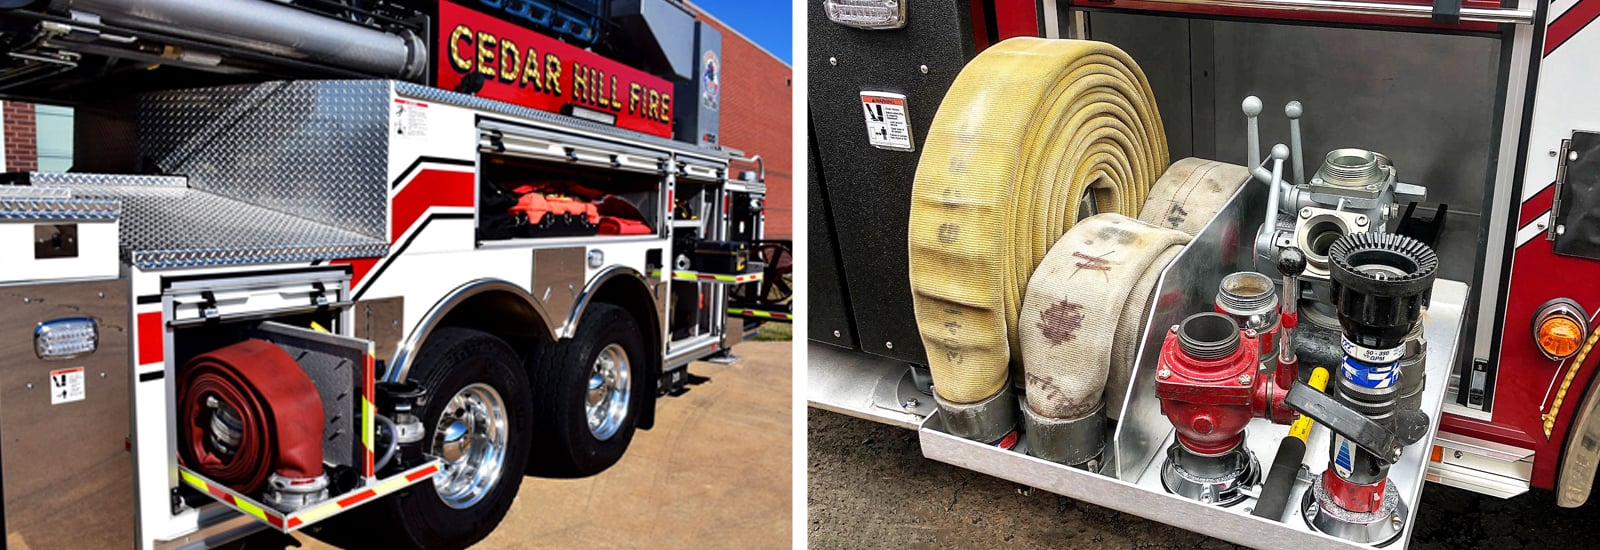 Images demonstrate how fire departments store critical equipment in easily accessible storage locations.